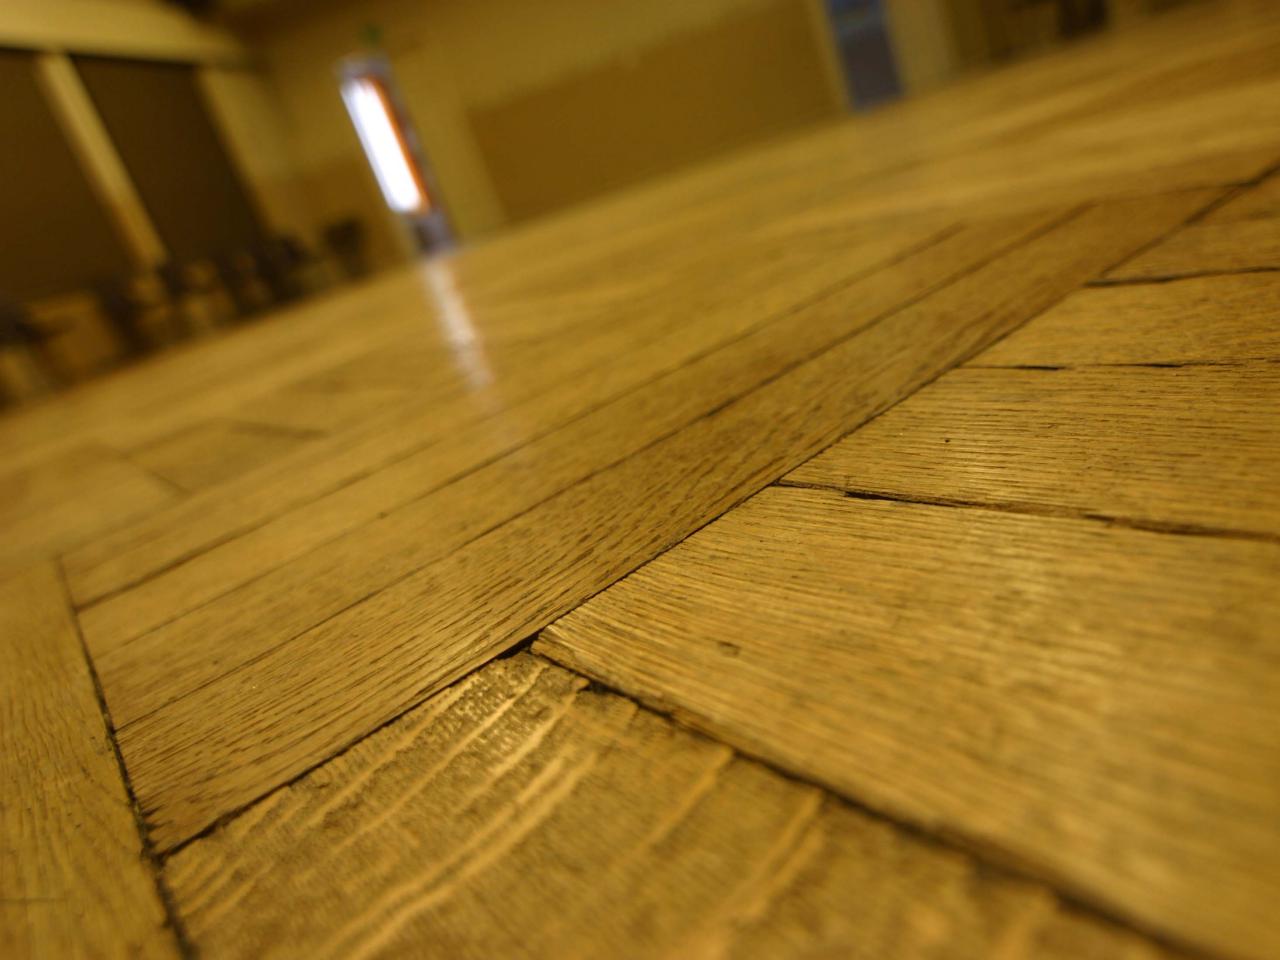 How To Fix A Squeaky Floor, How To Get Nail Glue Off Hardwood Floors